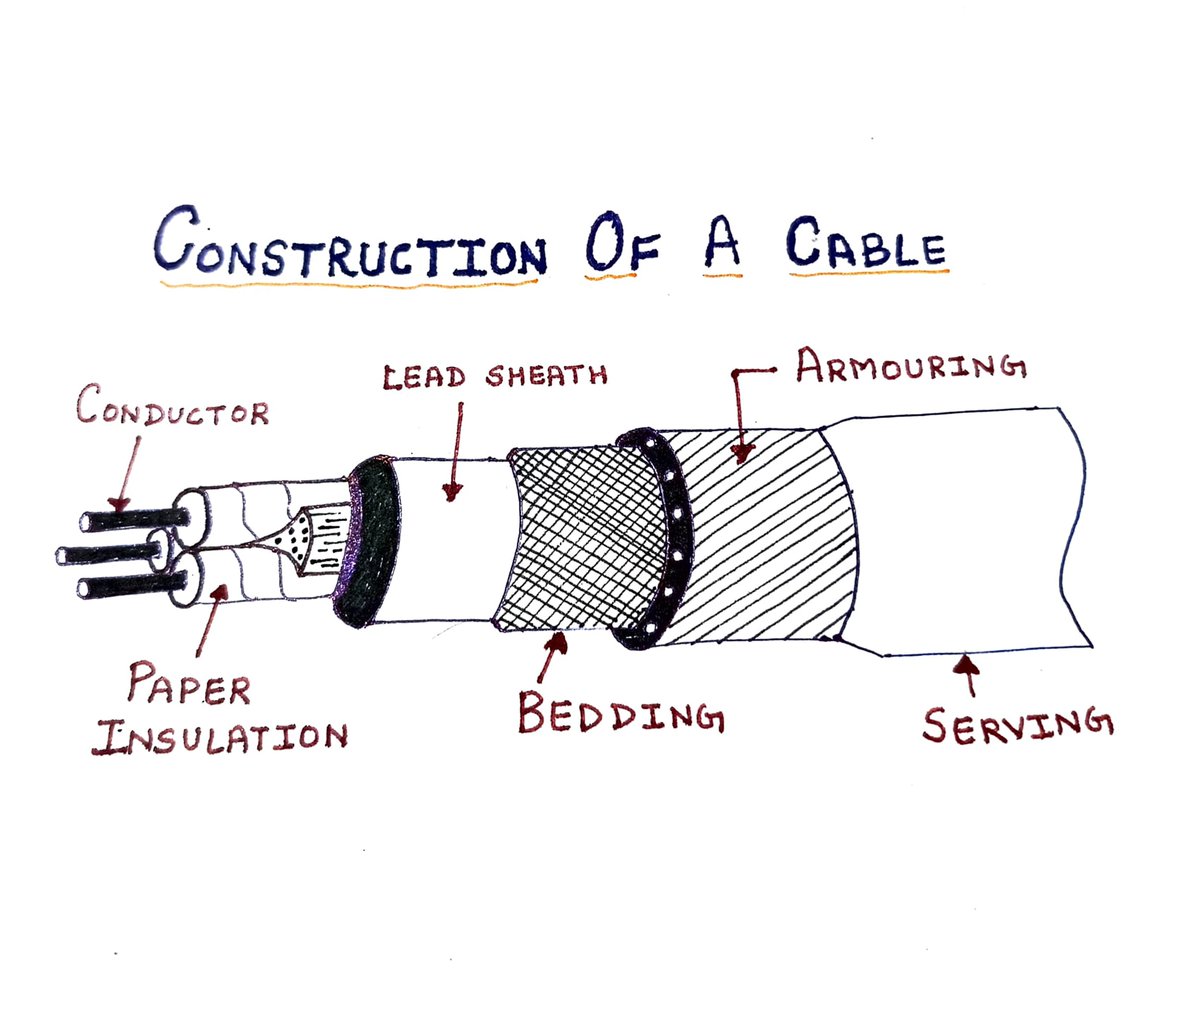 Construction of a Cable and its Important terms. 
Like and repost 🙌😍